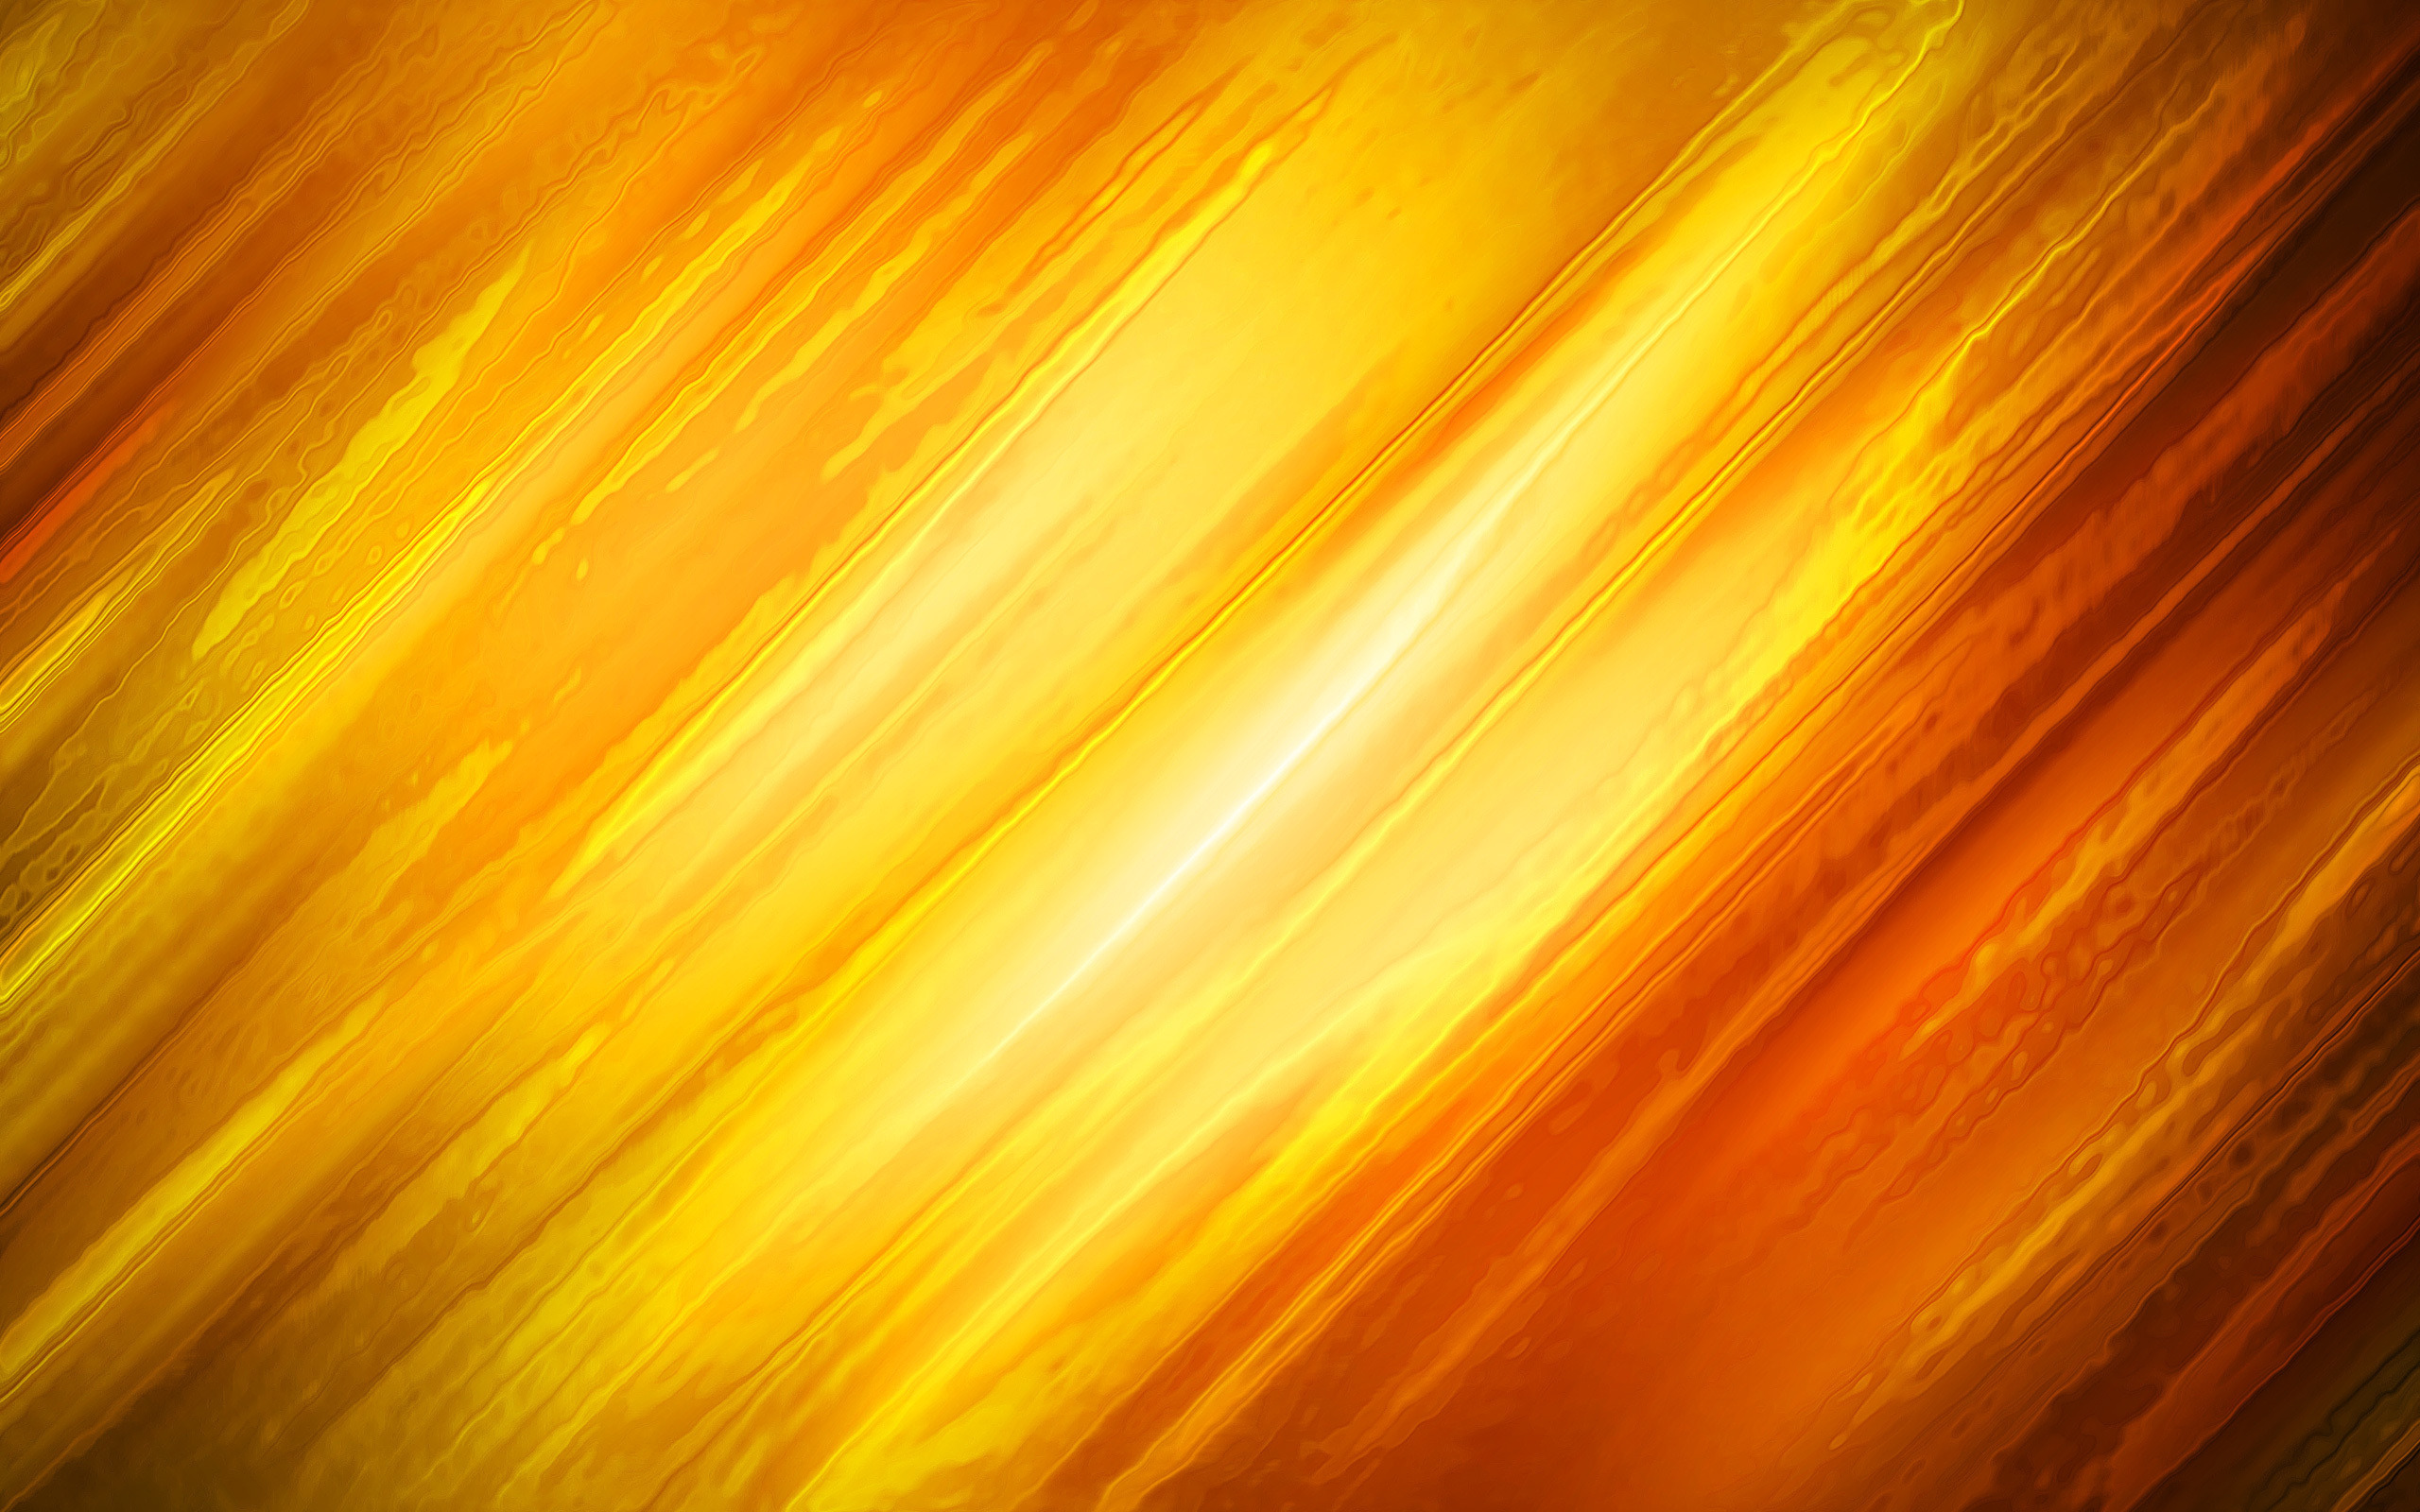 Download wallpaper Yellow beautiful background, yellow paint texture, yellow grunge background, lines, paint, blur for desktop with resolution 2560x1600. High Quality HD picture wallpaper